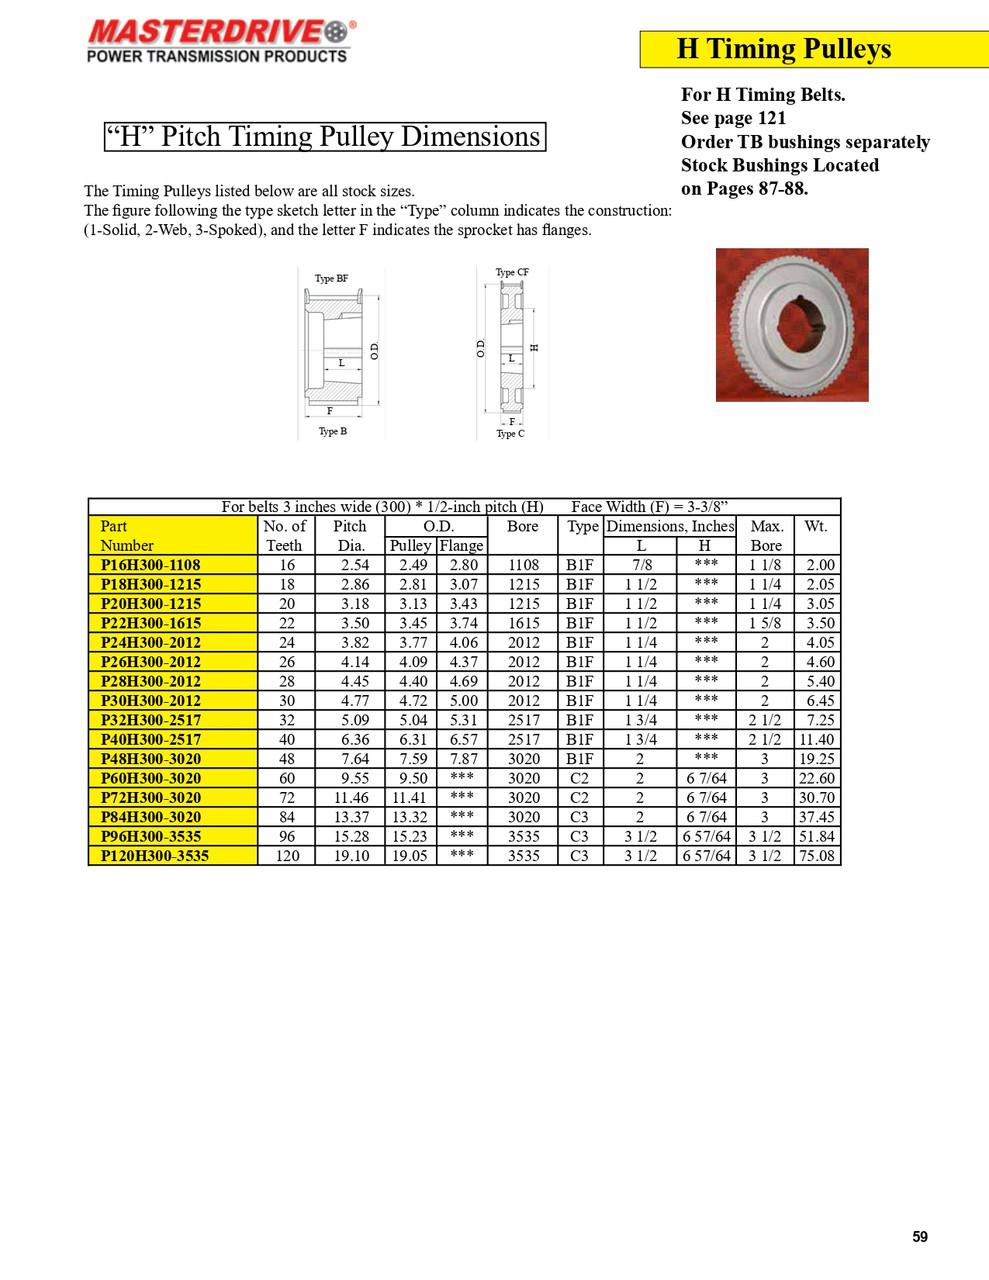 28 Tooth "H" Pitch "TB" Timing Pulley  P28H300-2012